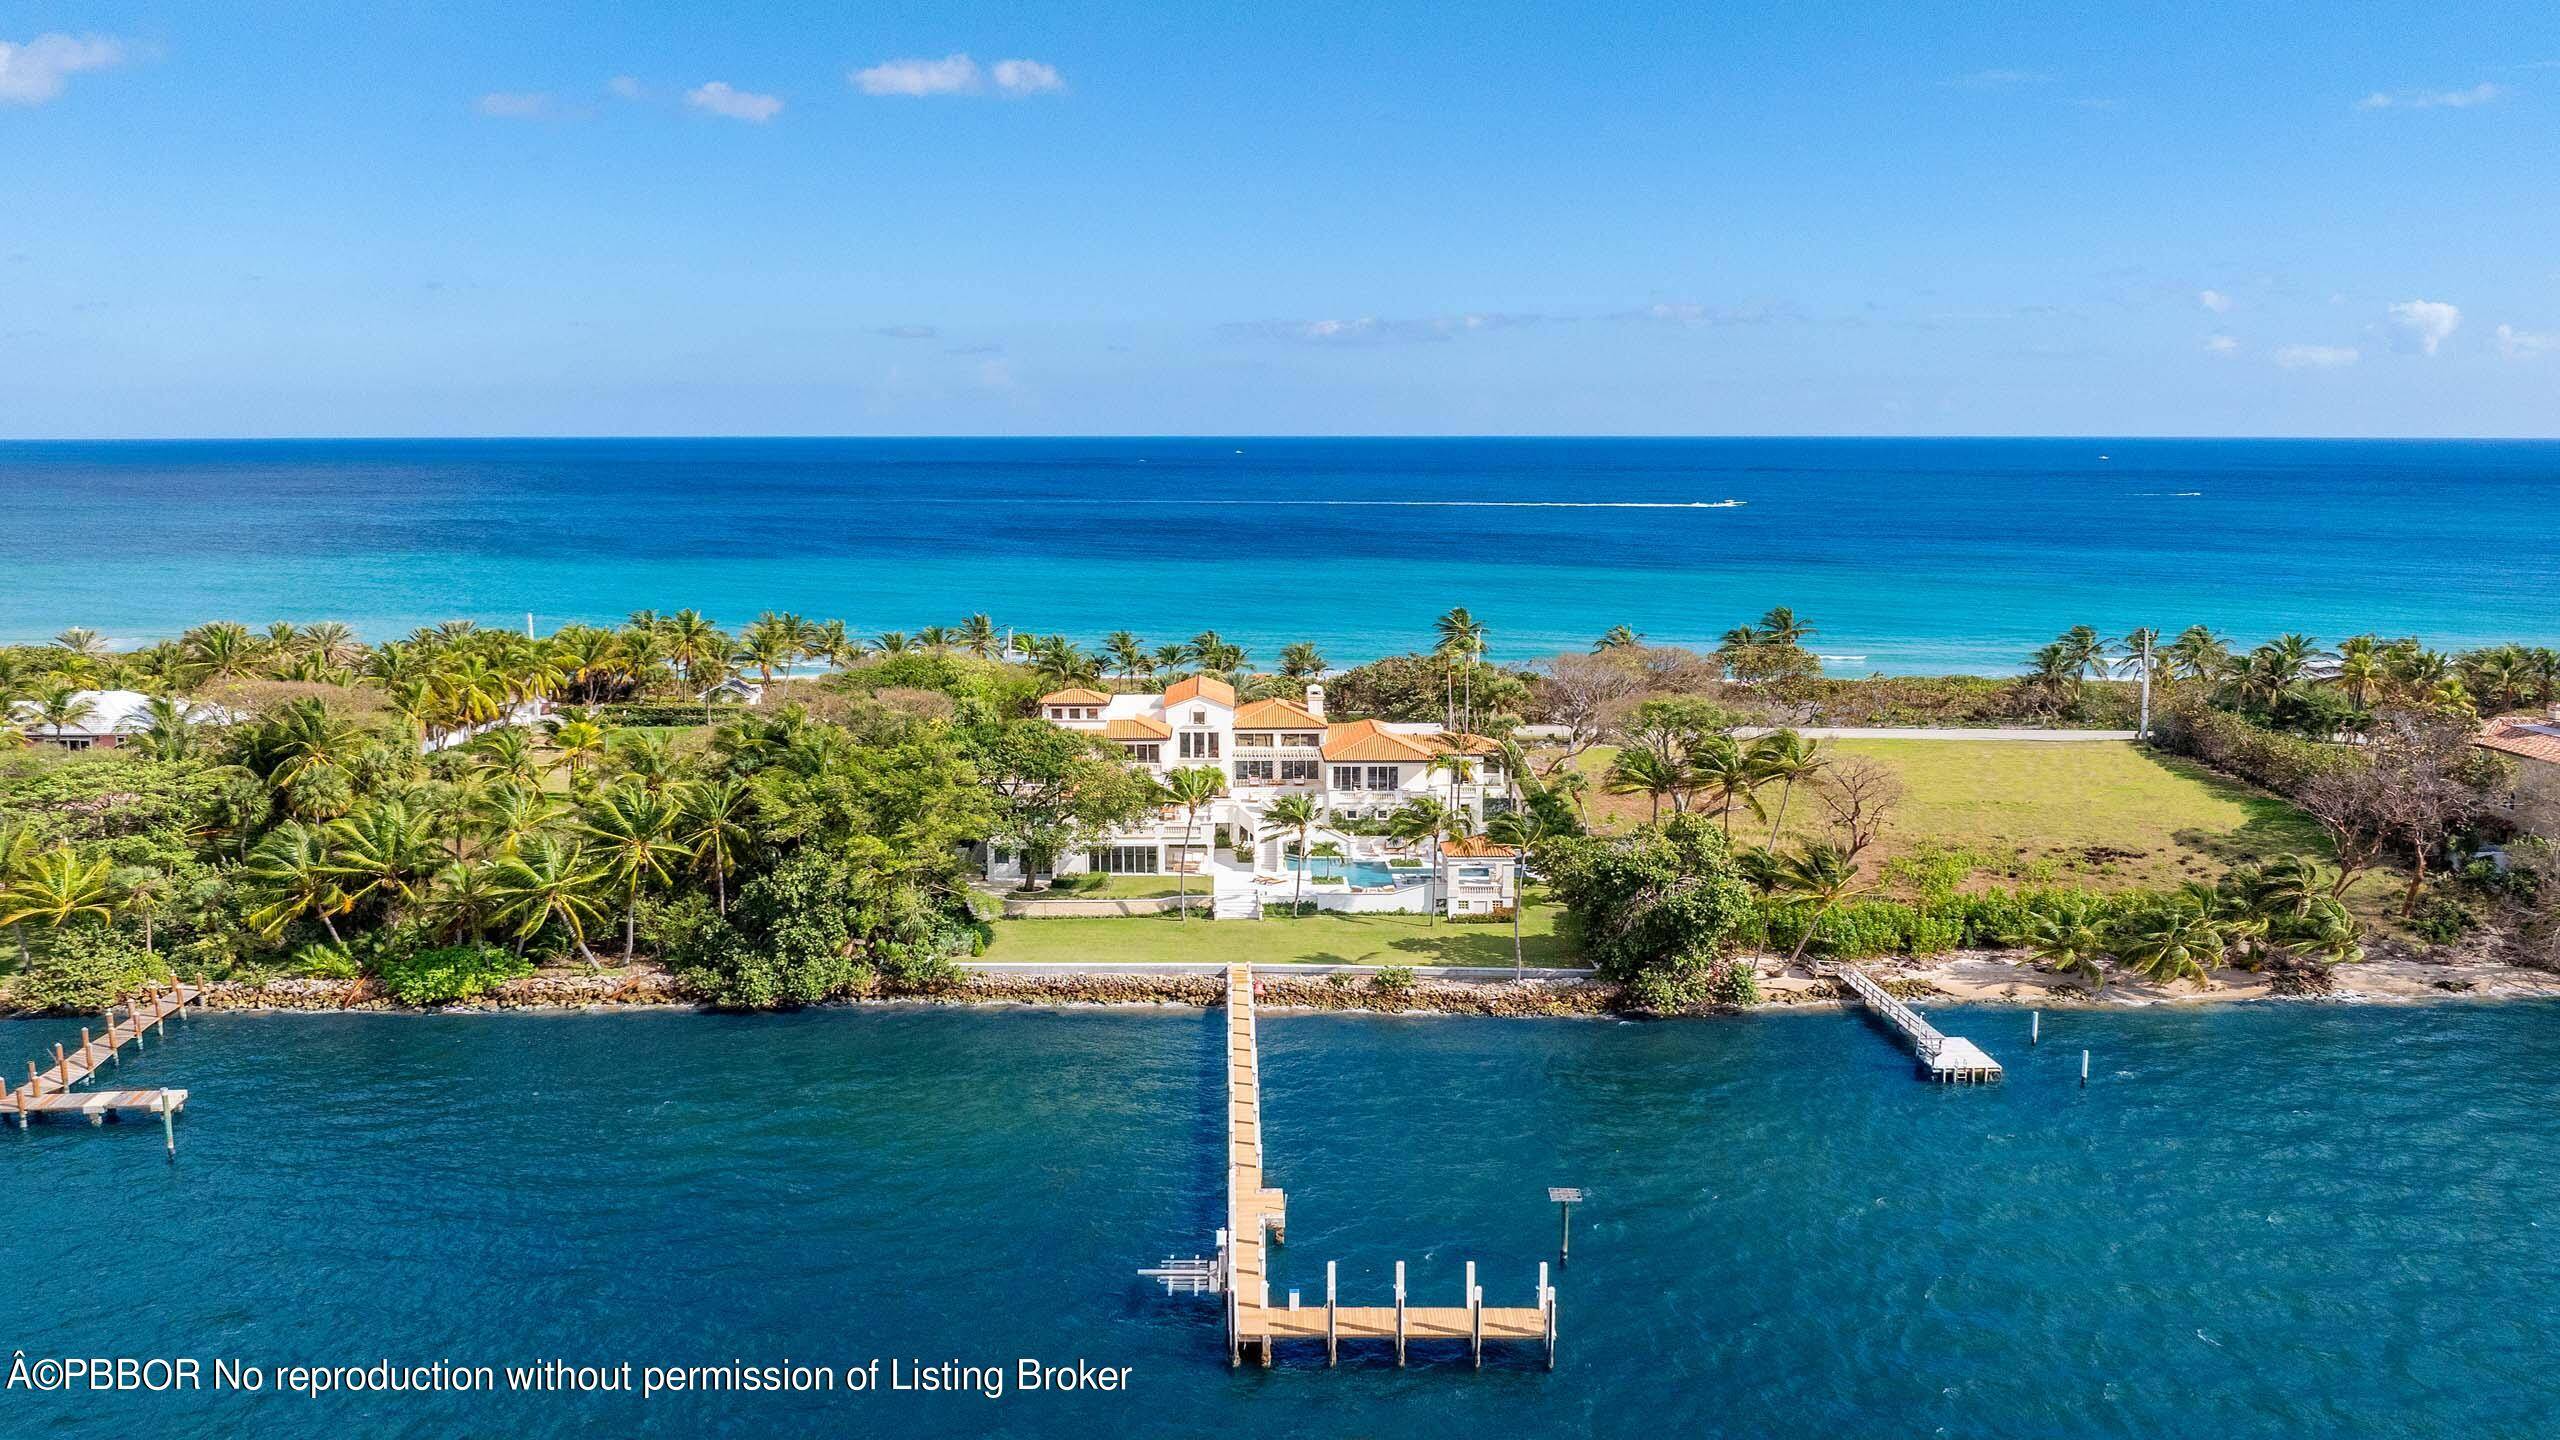 Recently updated, this stunning Ocean to Intracoastal Manalapan compound with beach house is situated on almost two acres with 150 feet of direct ocean and Intracoastal Waterway frontage.